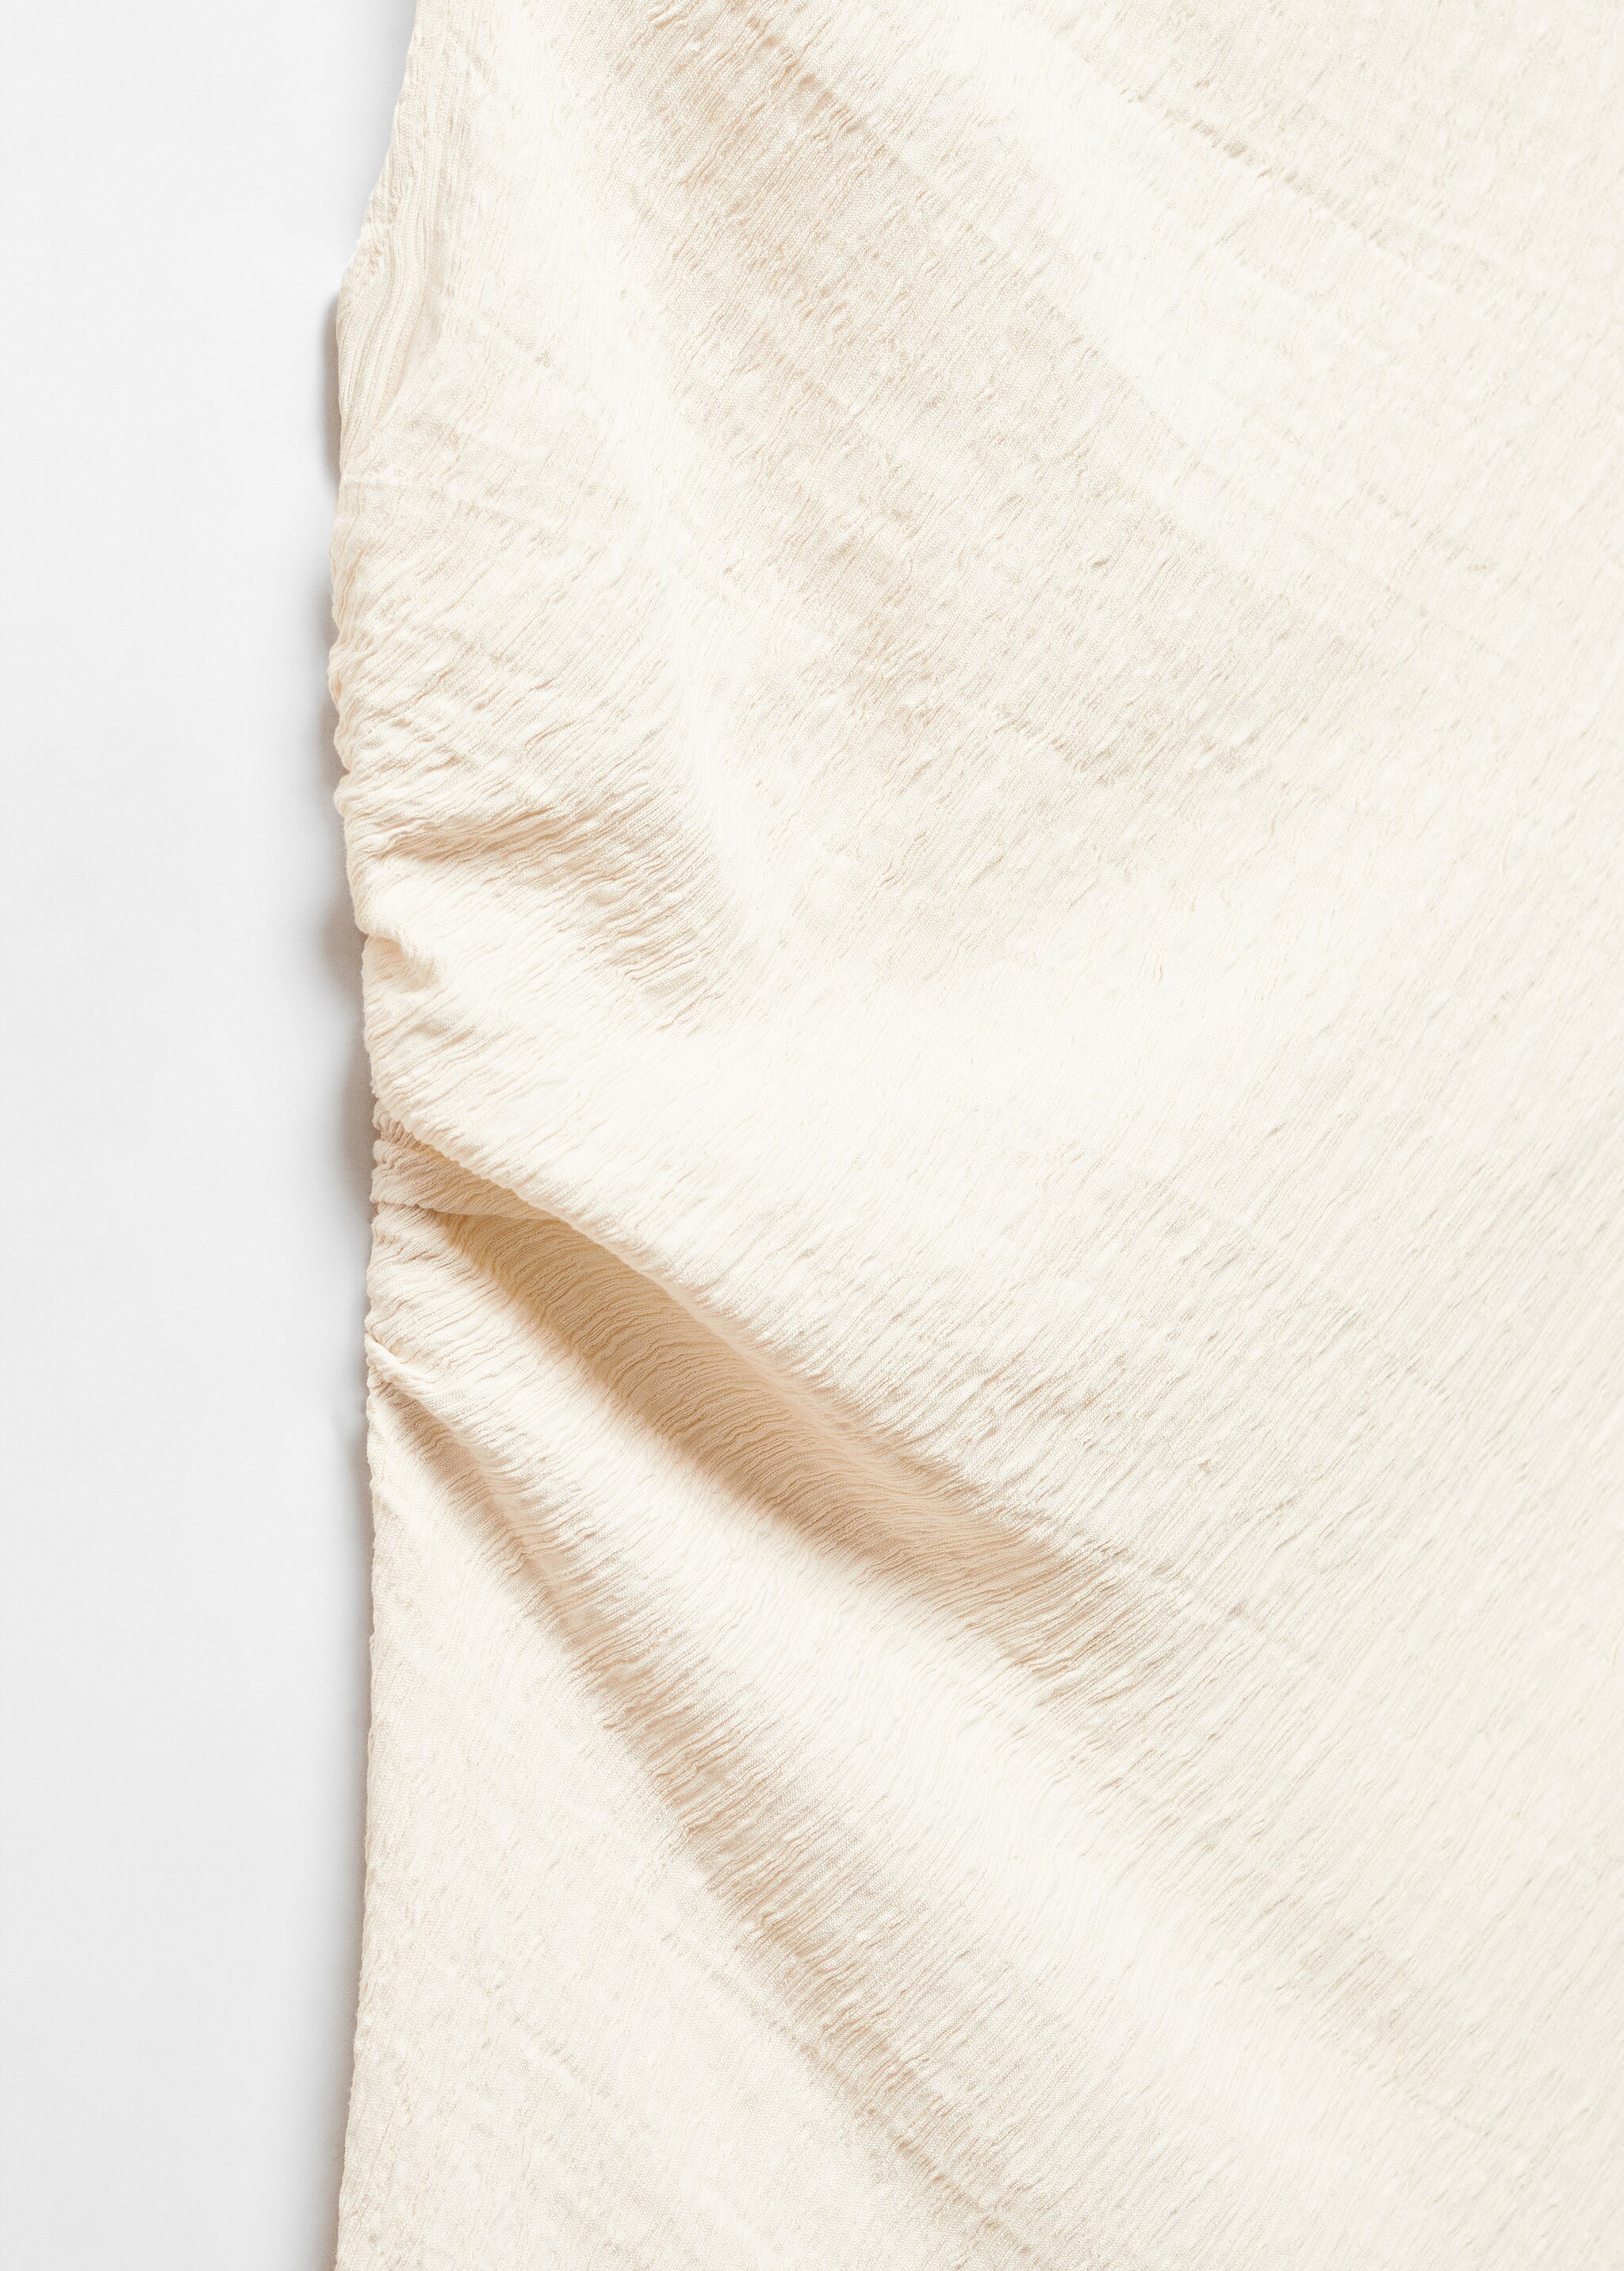 Draped dress with slit - Details of the article 8